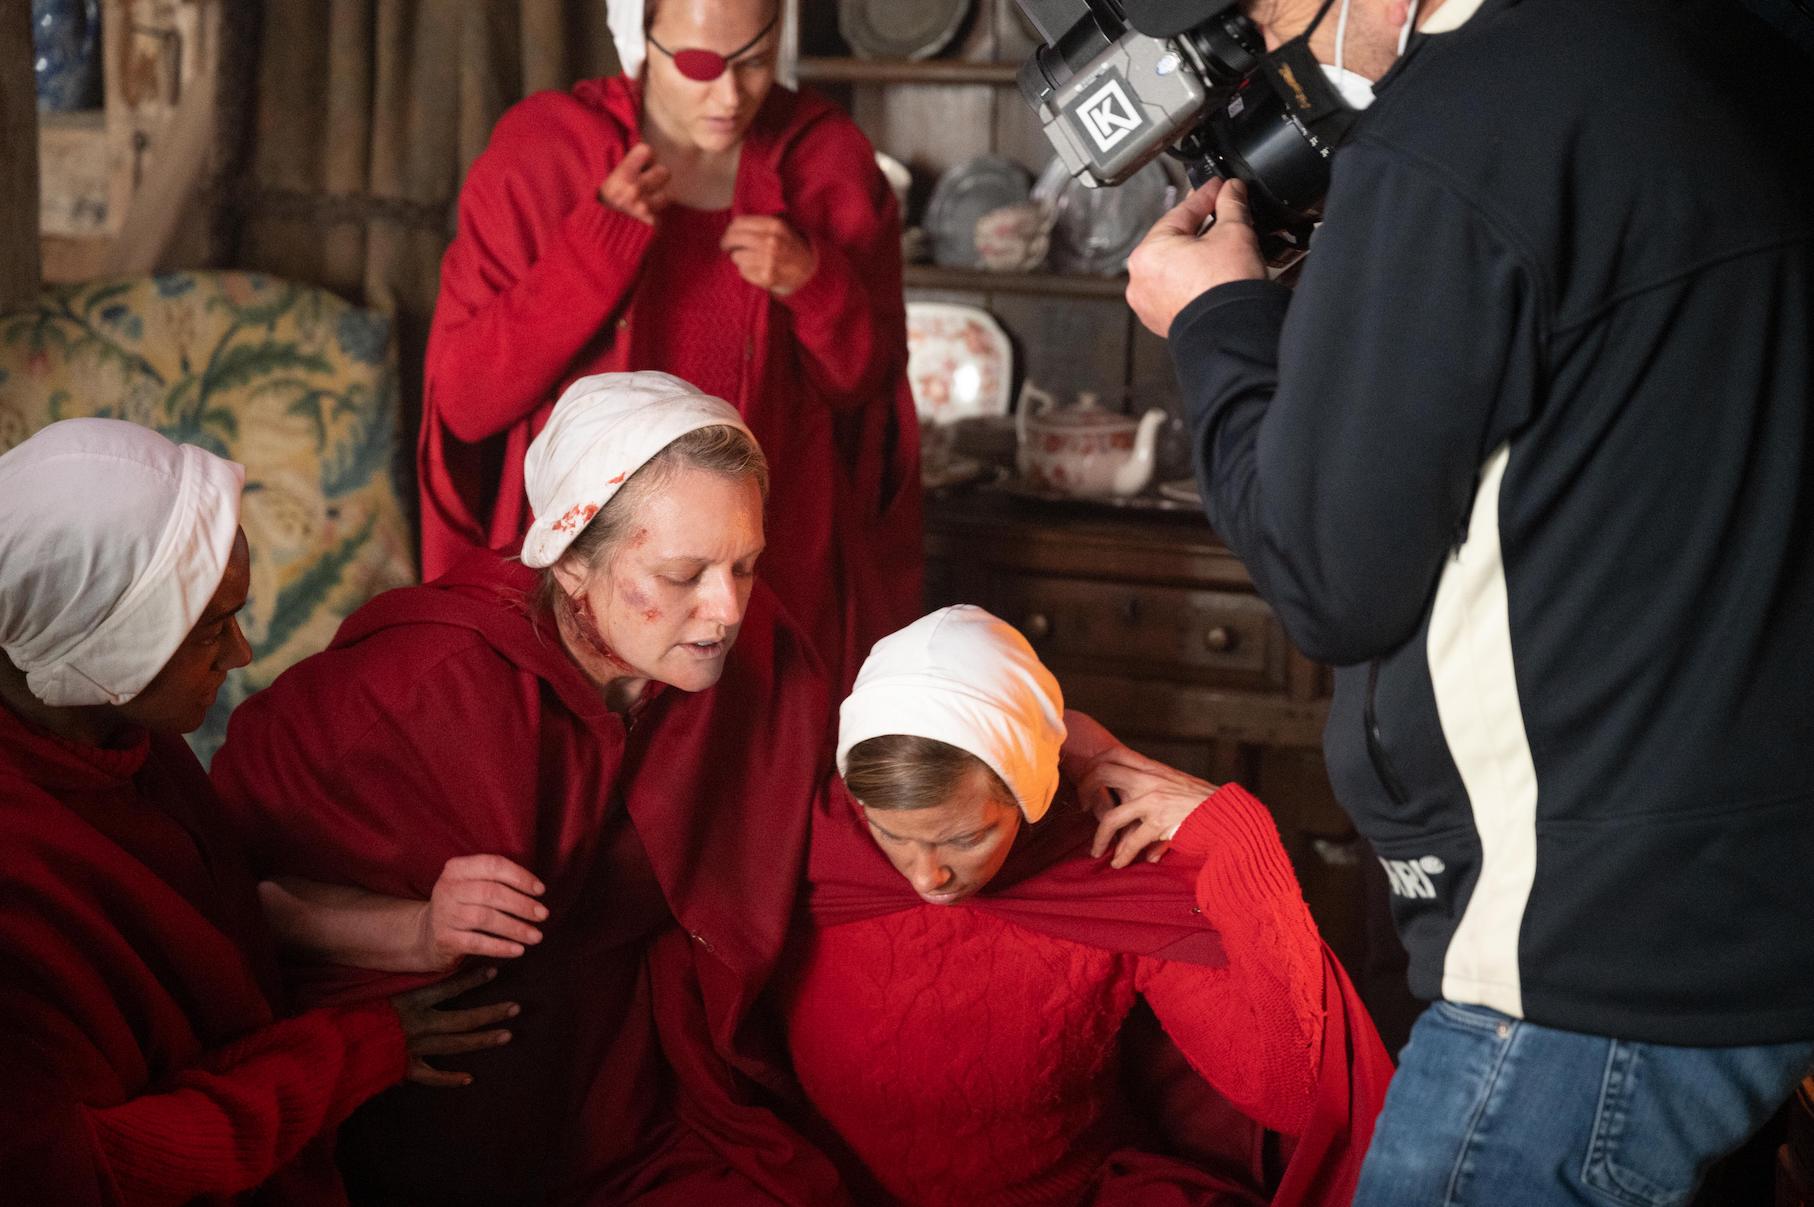 June Osborne surrounded by other handmaids and the camera crew for 'The Handmaid's Tale' Season 4